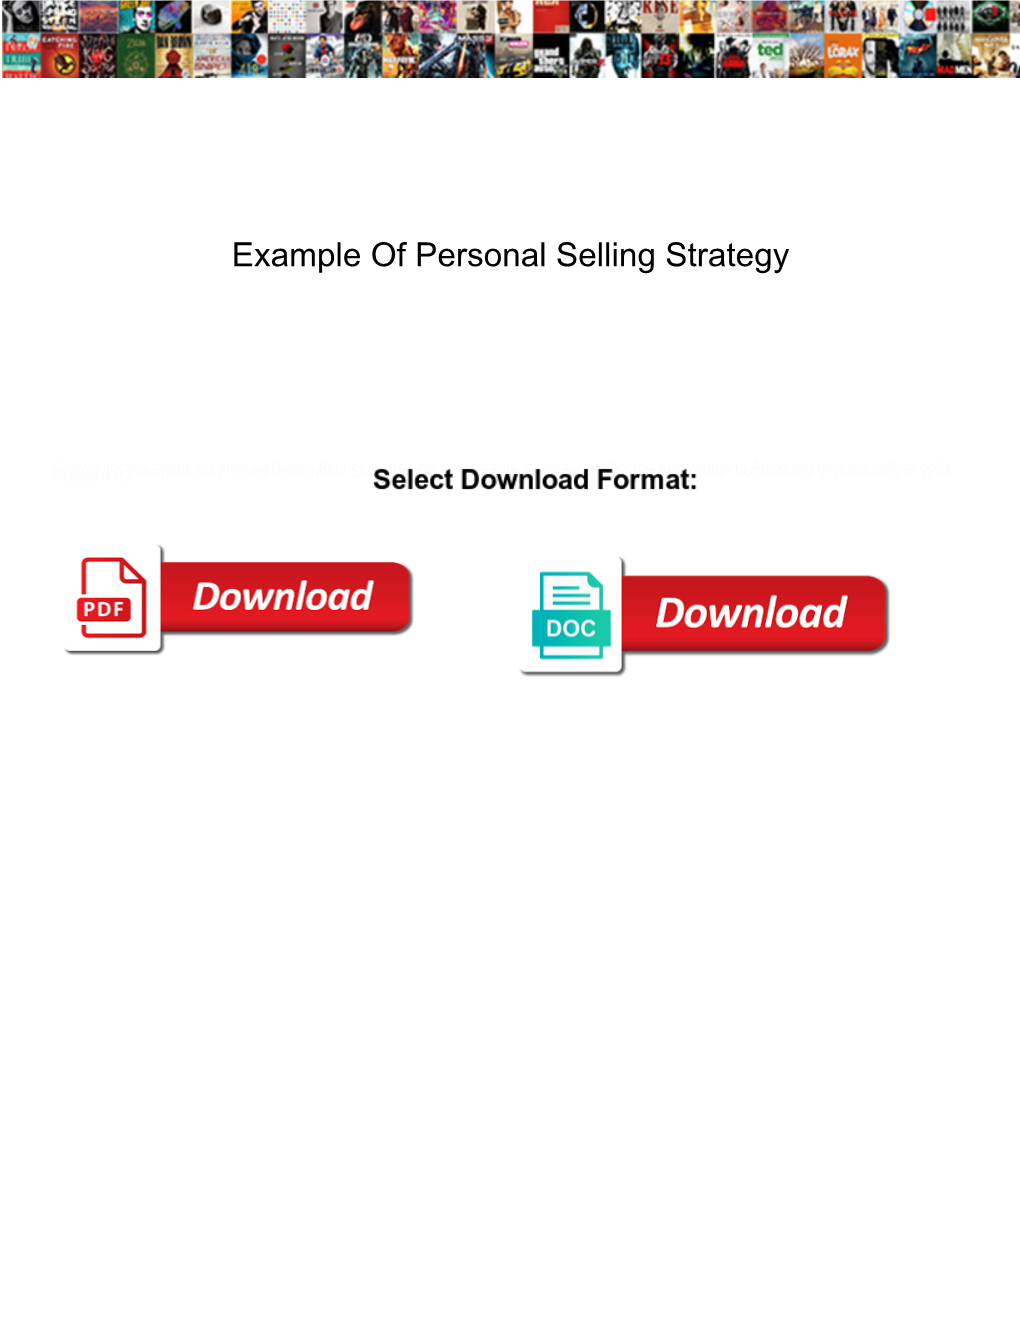 Example of Personal Selling Strategy